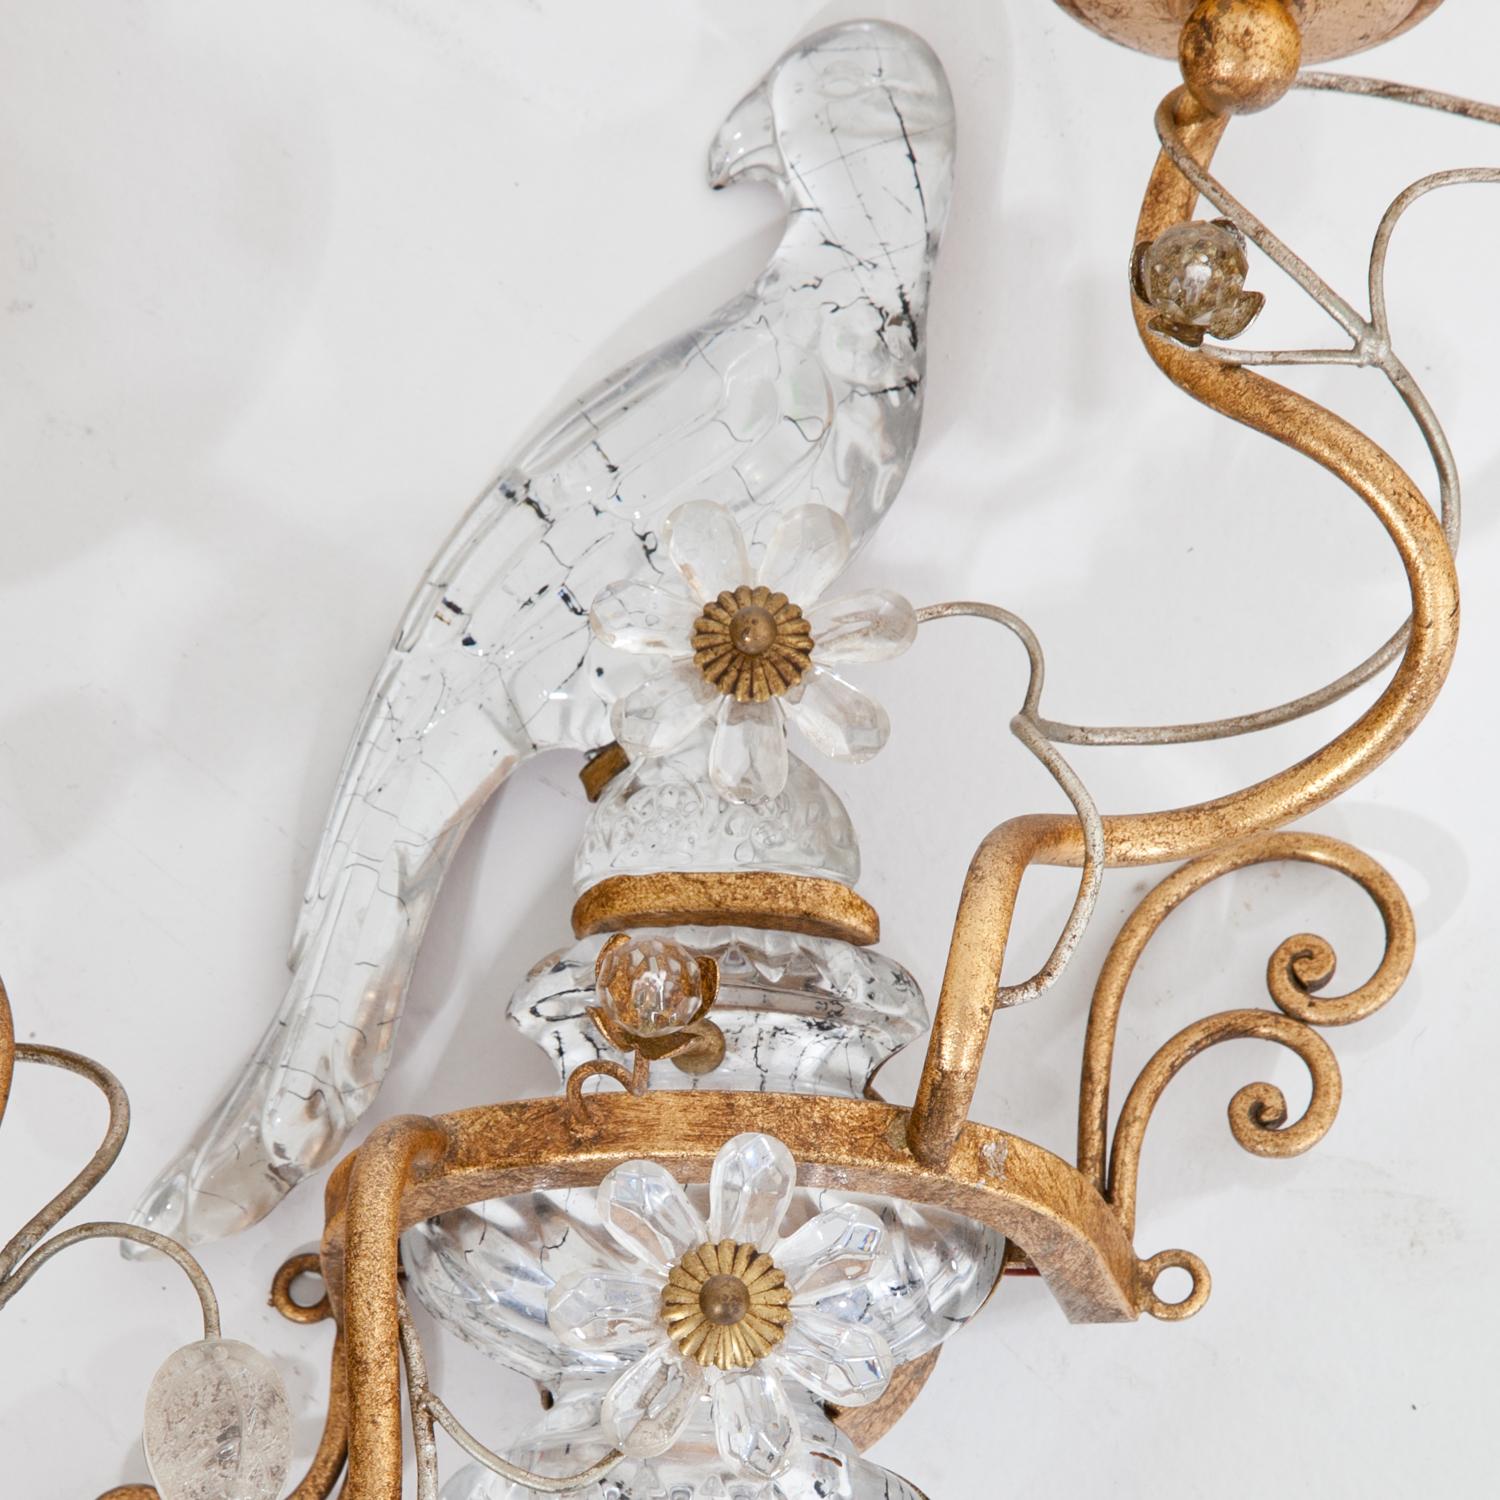 Pair of French two-light sconces with bird décor and wound gilt arms, decorated with glass leaves and flowers by Maison Baguès.